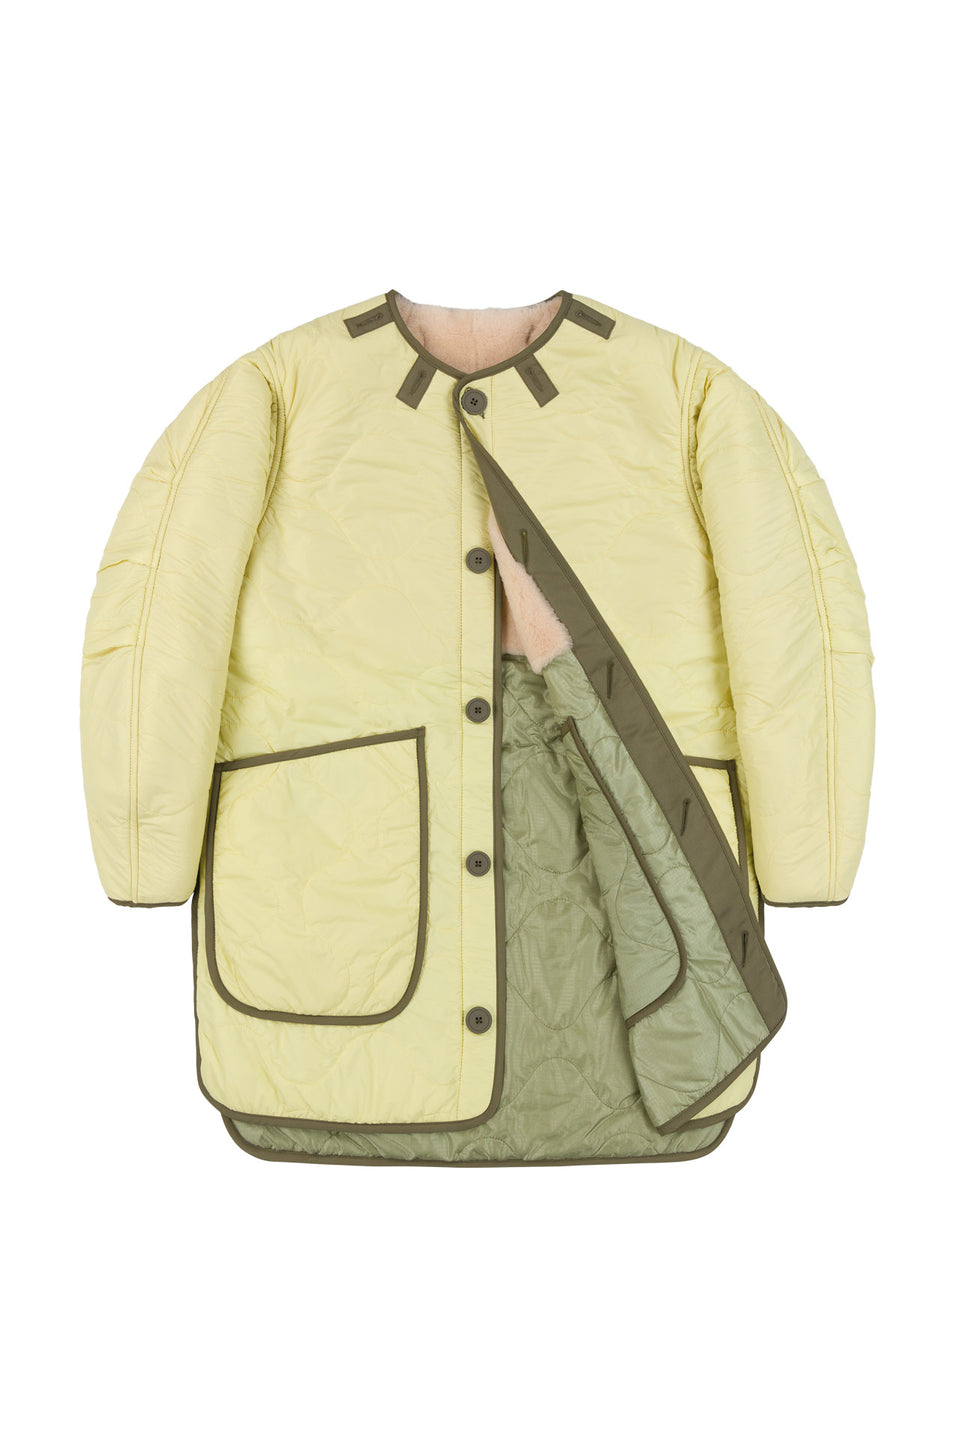 Shearling Quilt Jacket - Blush / Pale Yellow (listing page thumbnail)